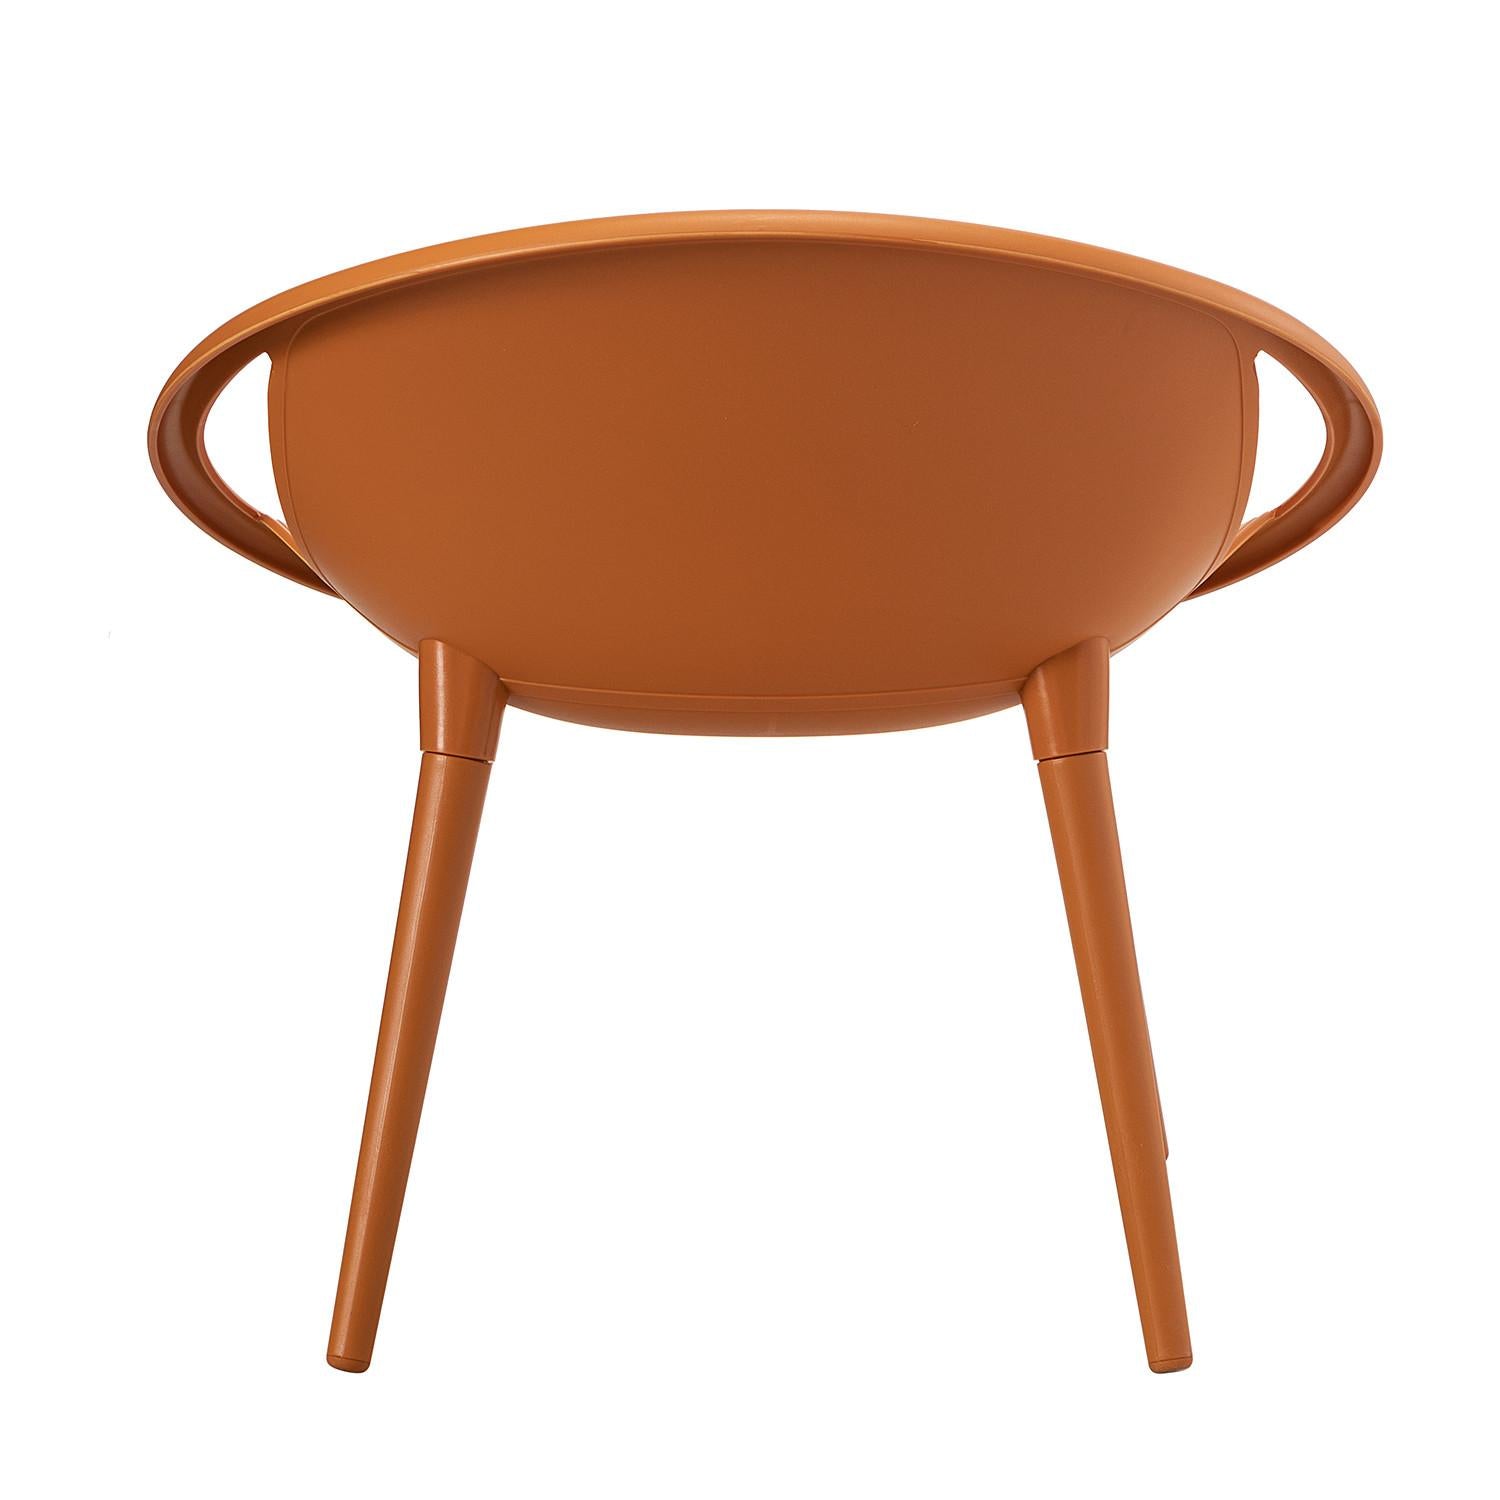 Solid Burnt Orange Saucer Outdoor Chairs and Table Set